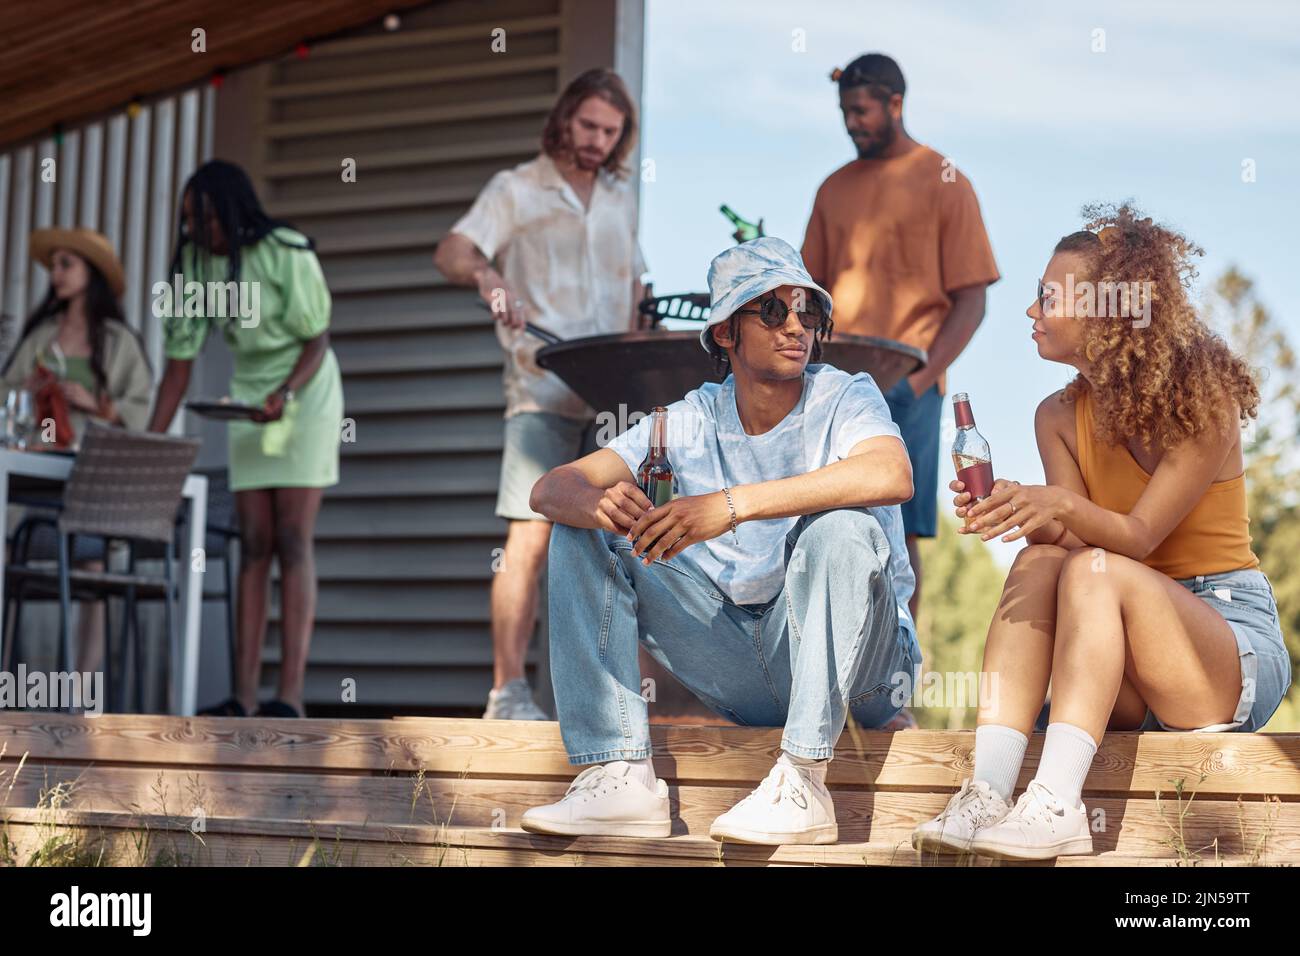 Diverse group of young people enjoying drinks during outdoor dinner in Summer cabin, focus on couple in foreground Stock Photo